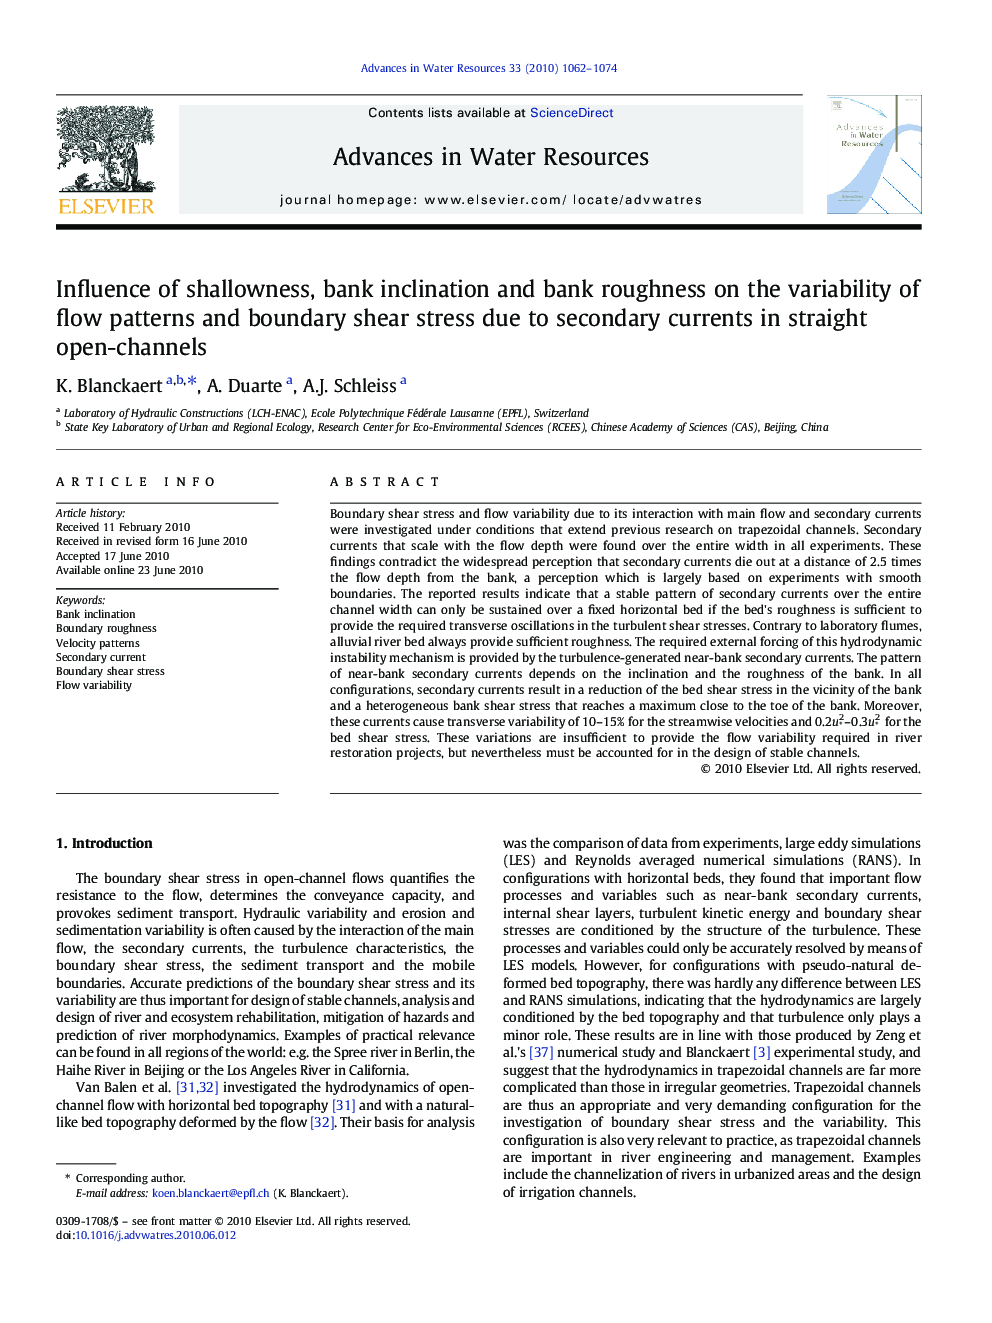 Influence of shallowness, bank inclination and bank roughness on the variability of flow patterns and boundary shear stress due to secondary currents in straight open-channels